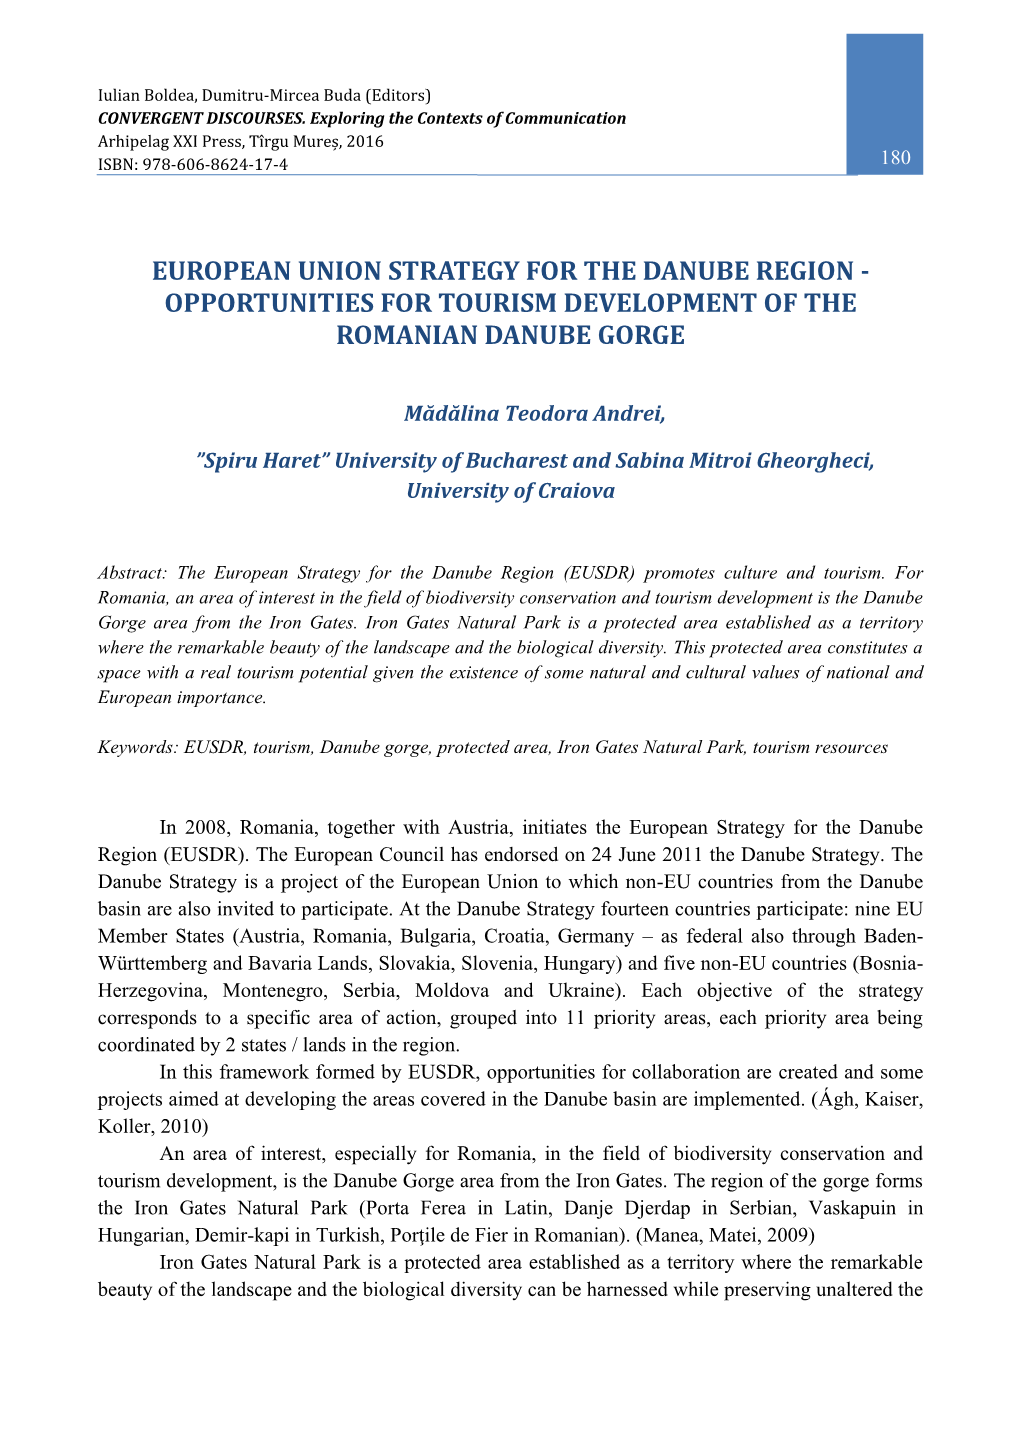 European Union Strategy for the Danube Region - Opportunities for Tourism Development of the Romanian Danube Gorge